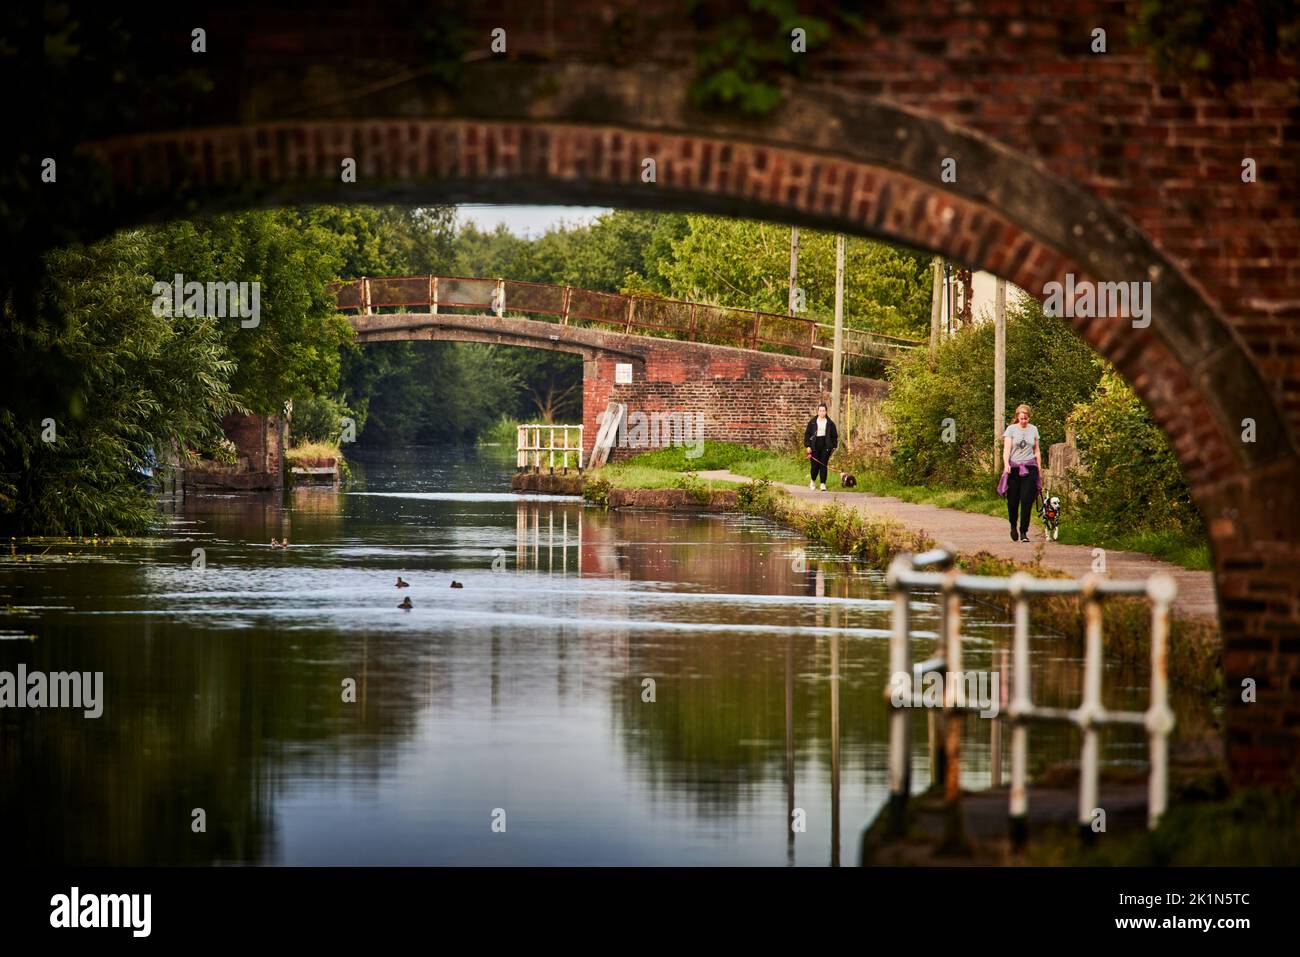 Bridgewater canal in Astley, Gtr Manchester Stock Photo